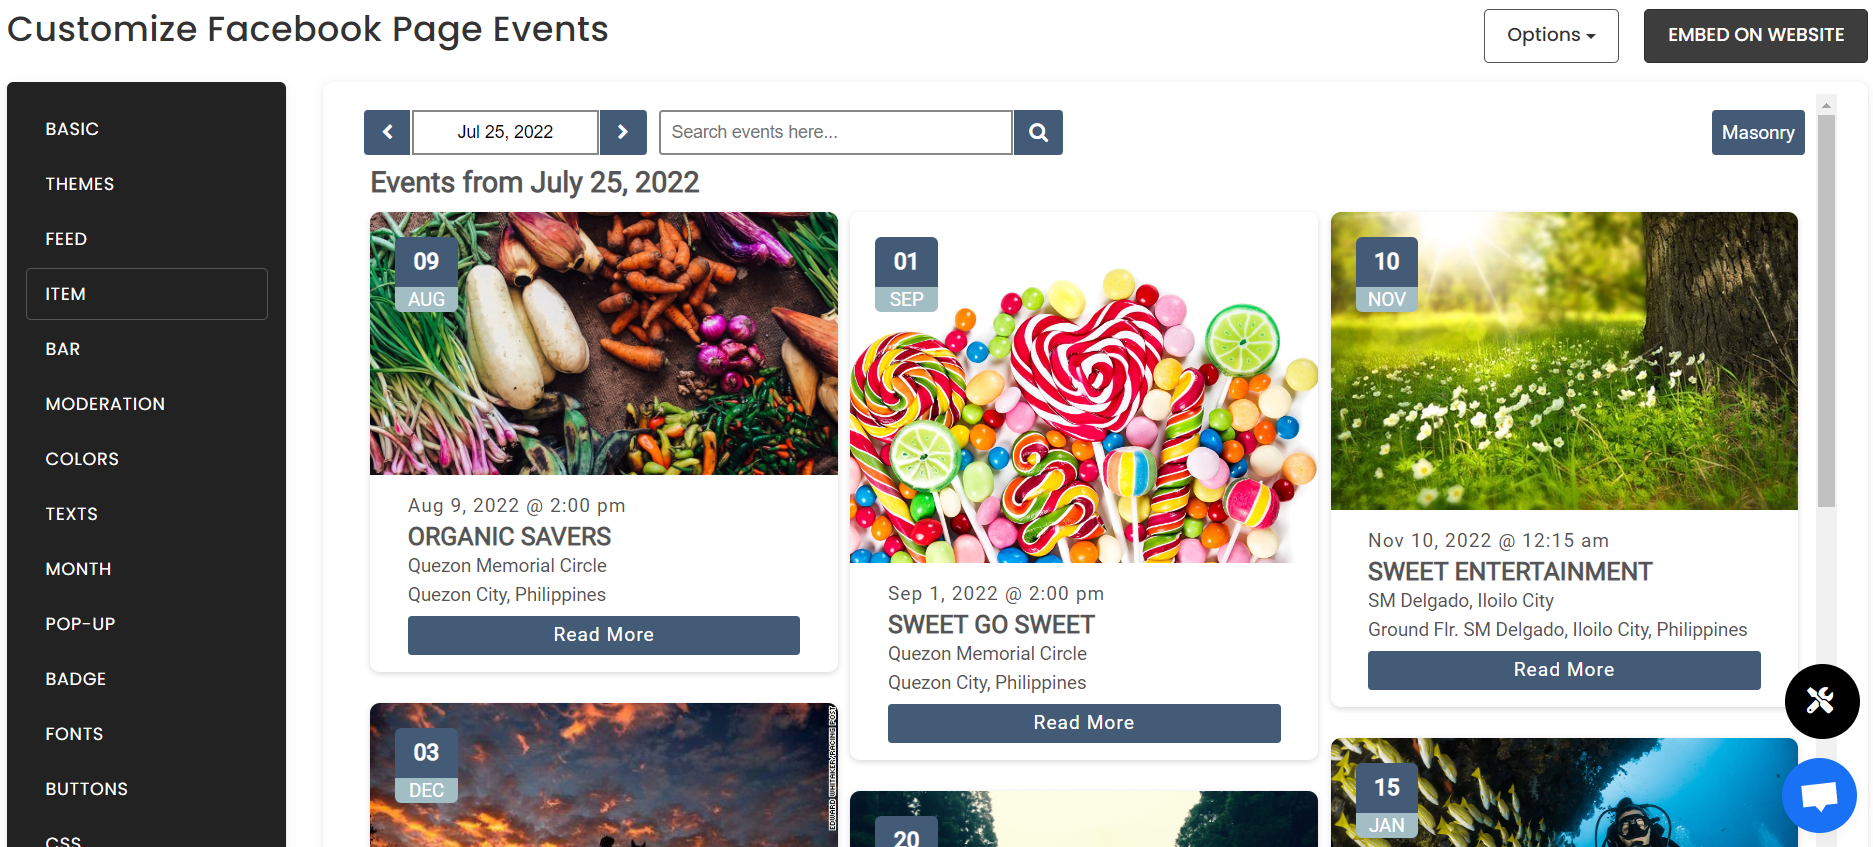 Customize your feed - How To Embed Facebook Page Events On Website For Free?